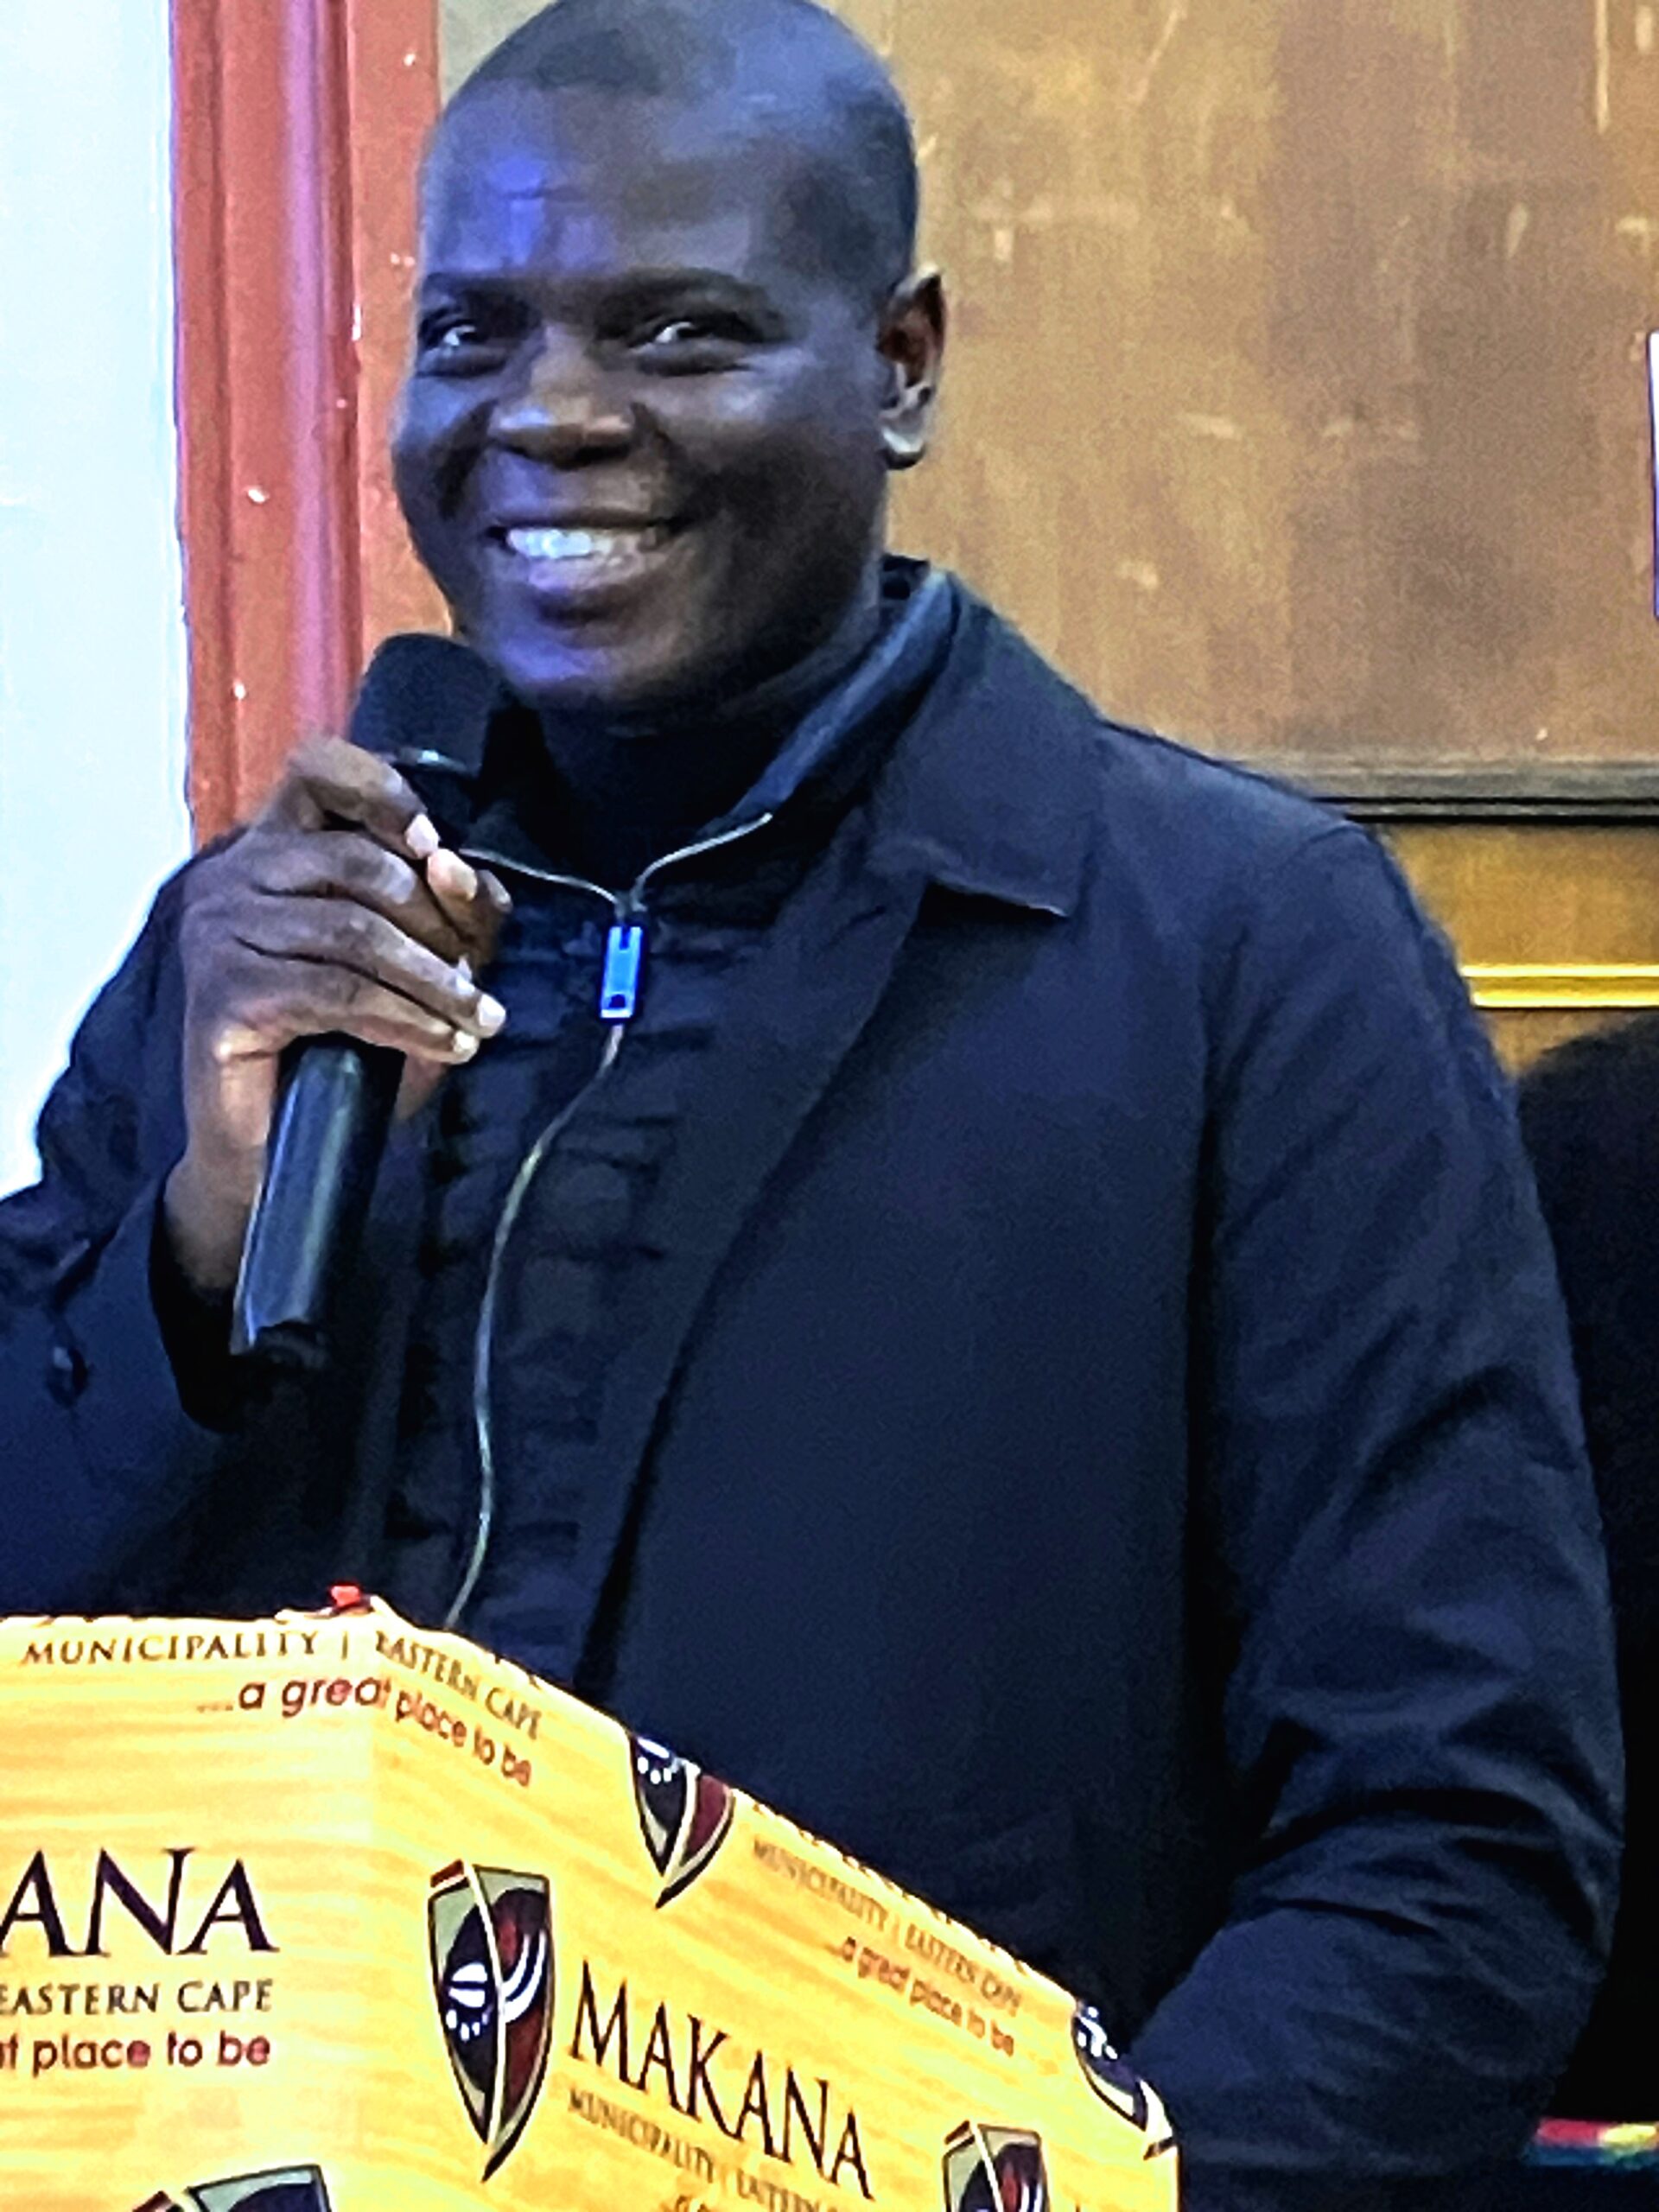 Justice Minister Ronald Lamola made a special trip to Makhanda to engage with residents about the proposed move of the High Court to Bhisho.